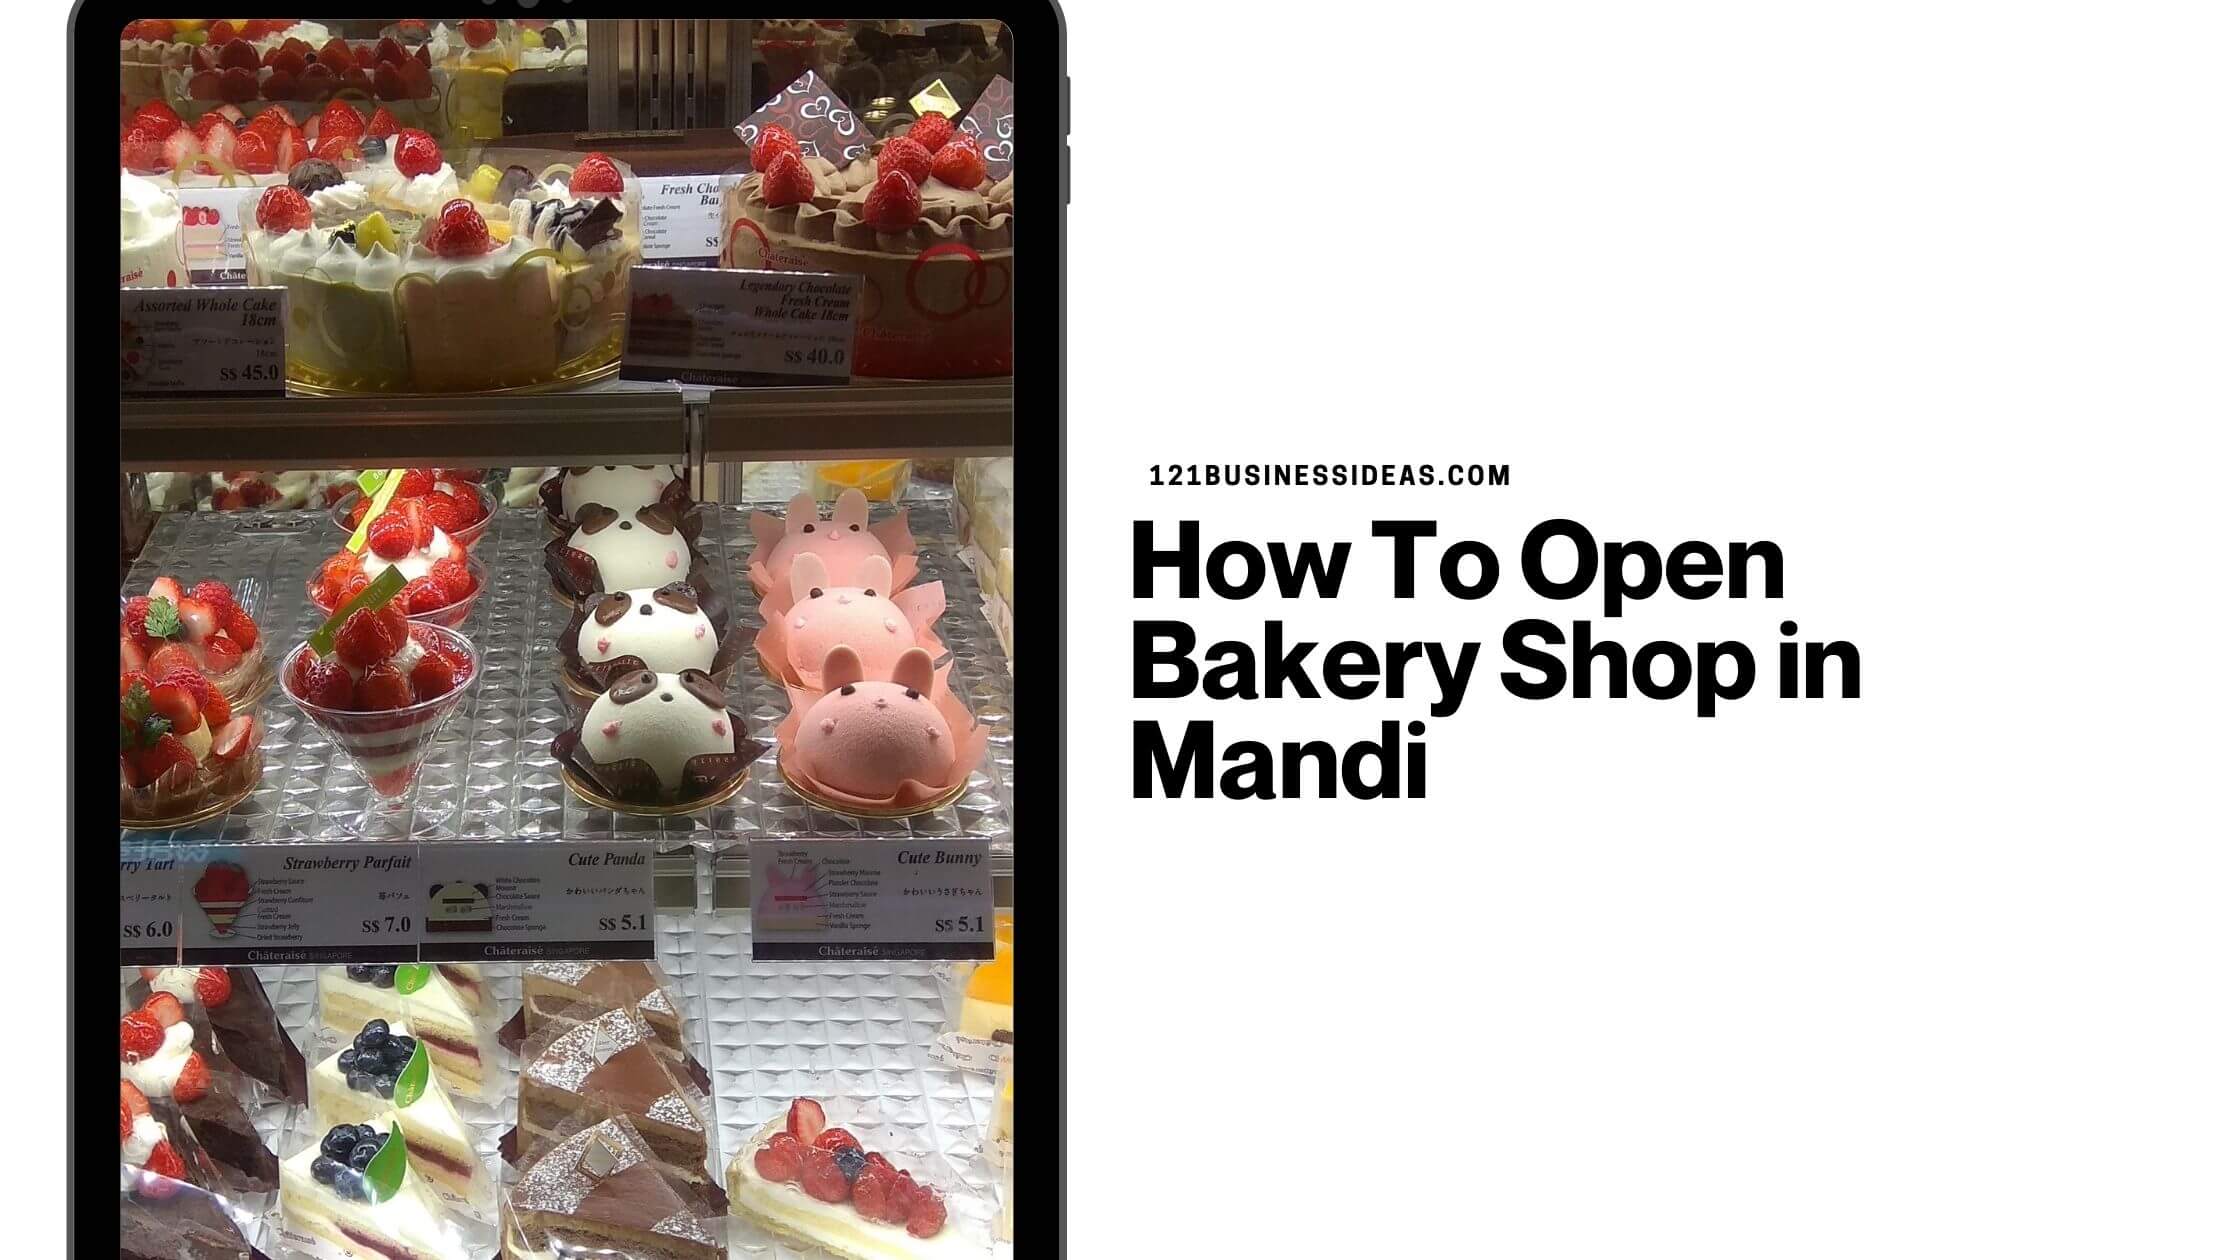 How To Open Bakery Shop in Mandi (1)